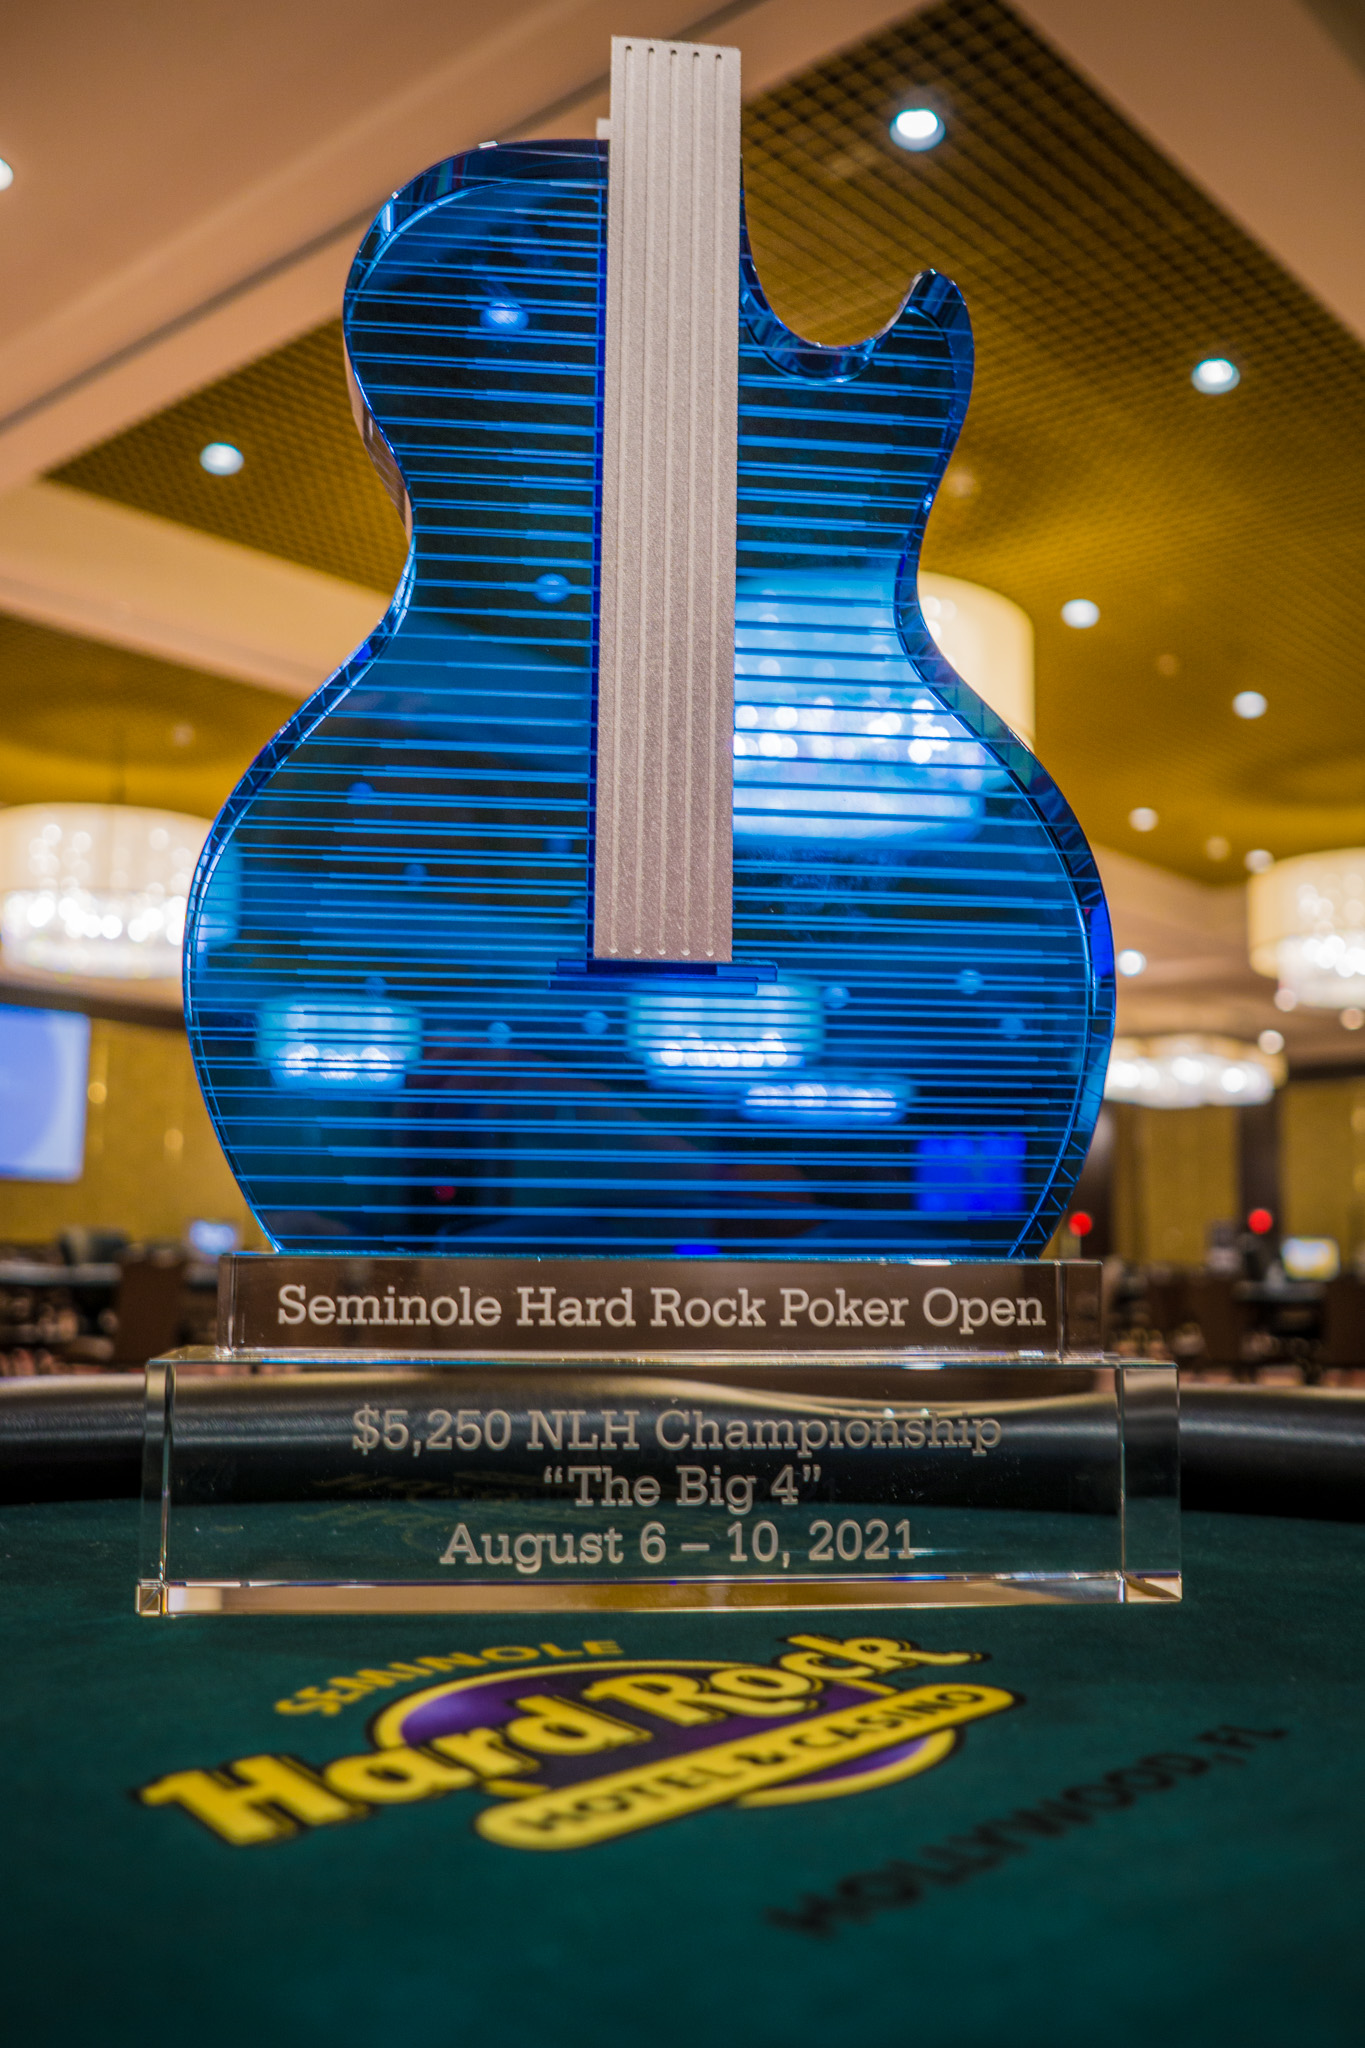 Blue Crystal Guitar Poker Trophy created by B-A Winner was a Global Poker Awards Top Four nominee